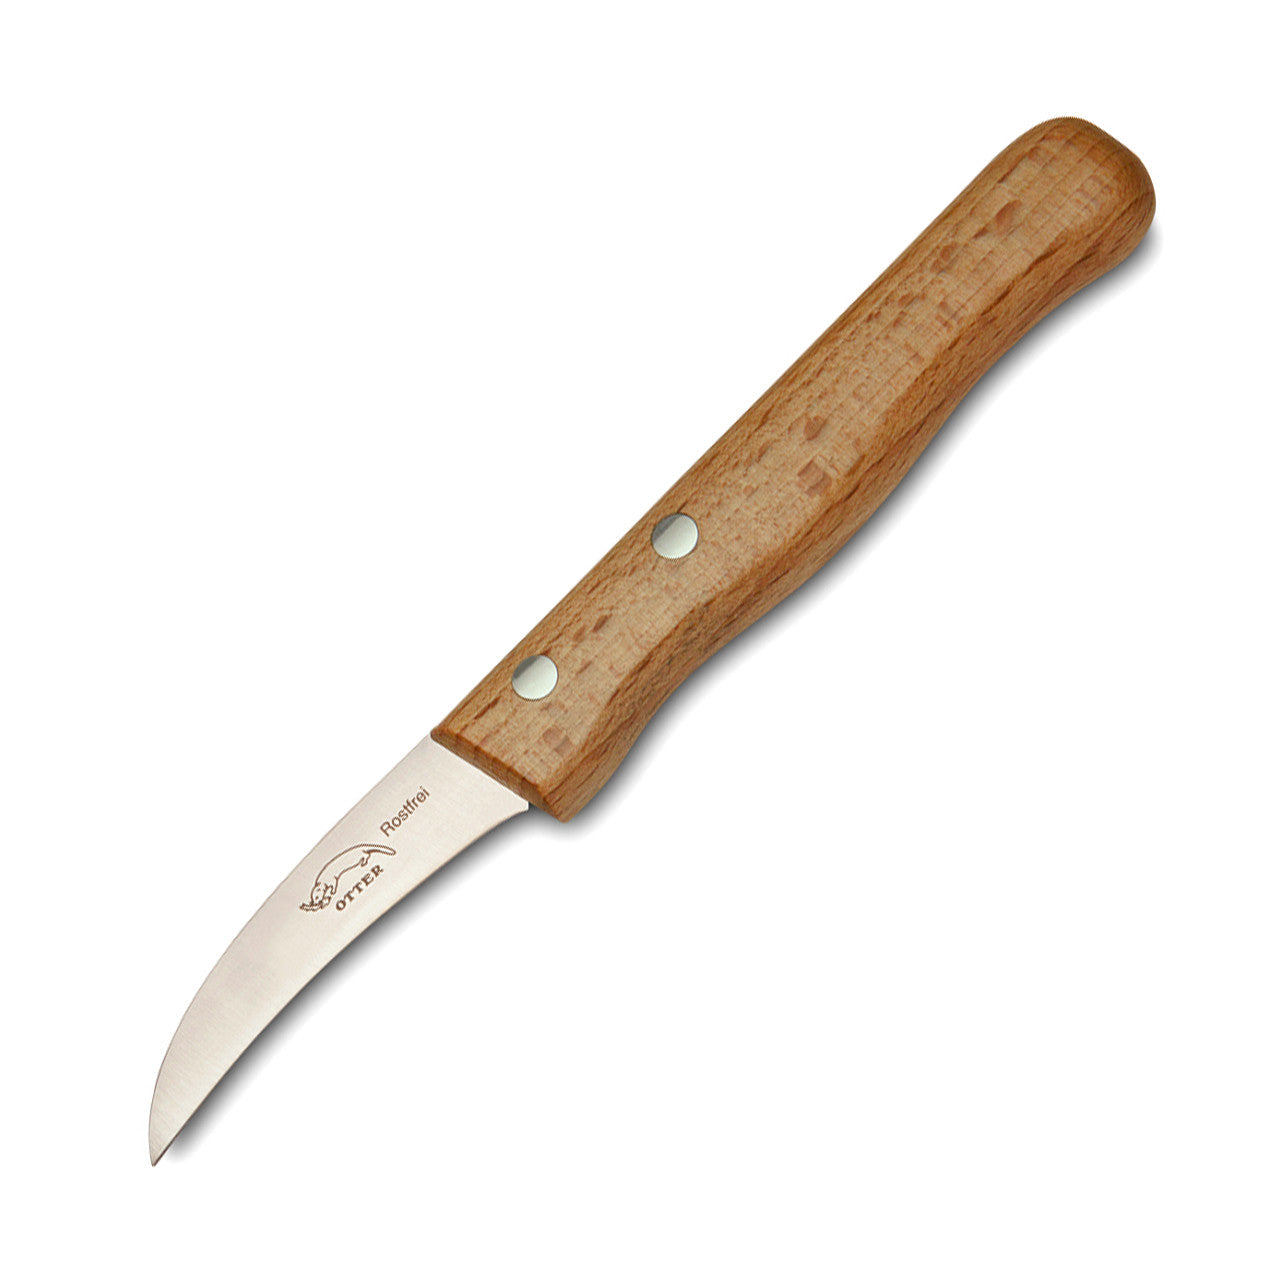 Kitchen knife curved  -  Beech or Olive wood